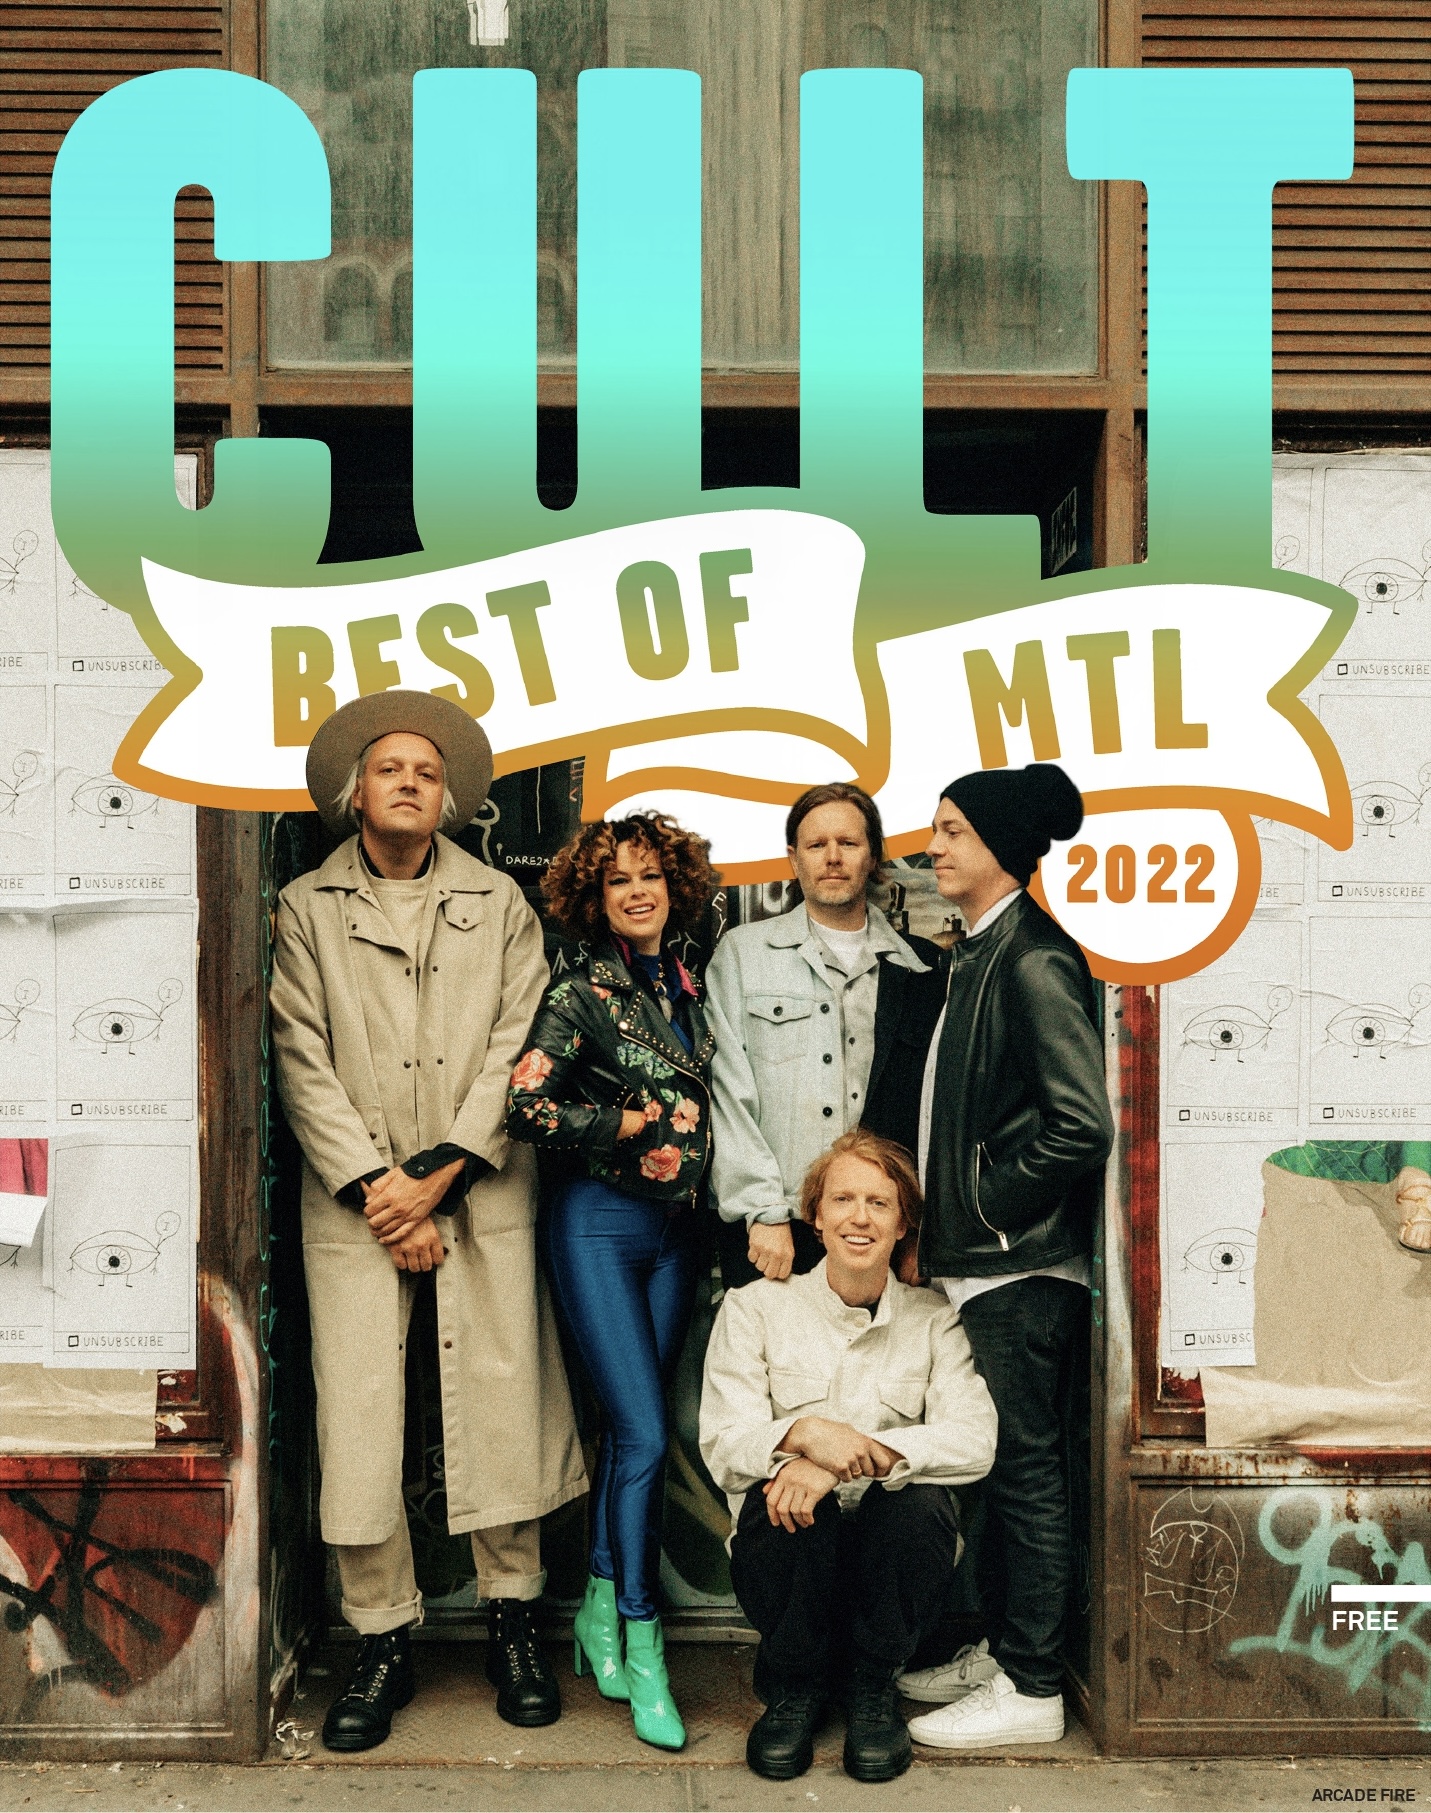 Arcade Fire Best of MTL Montreal may 2022 cult mtl issue magazine print